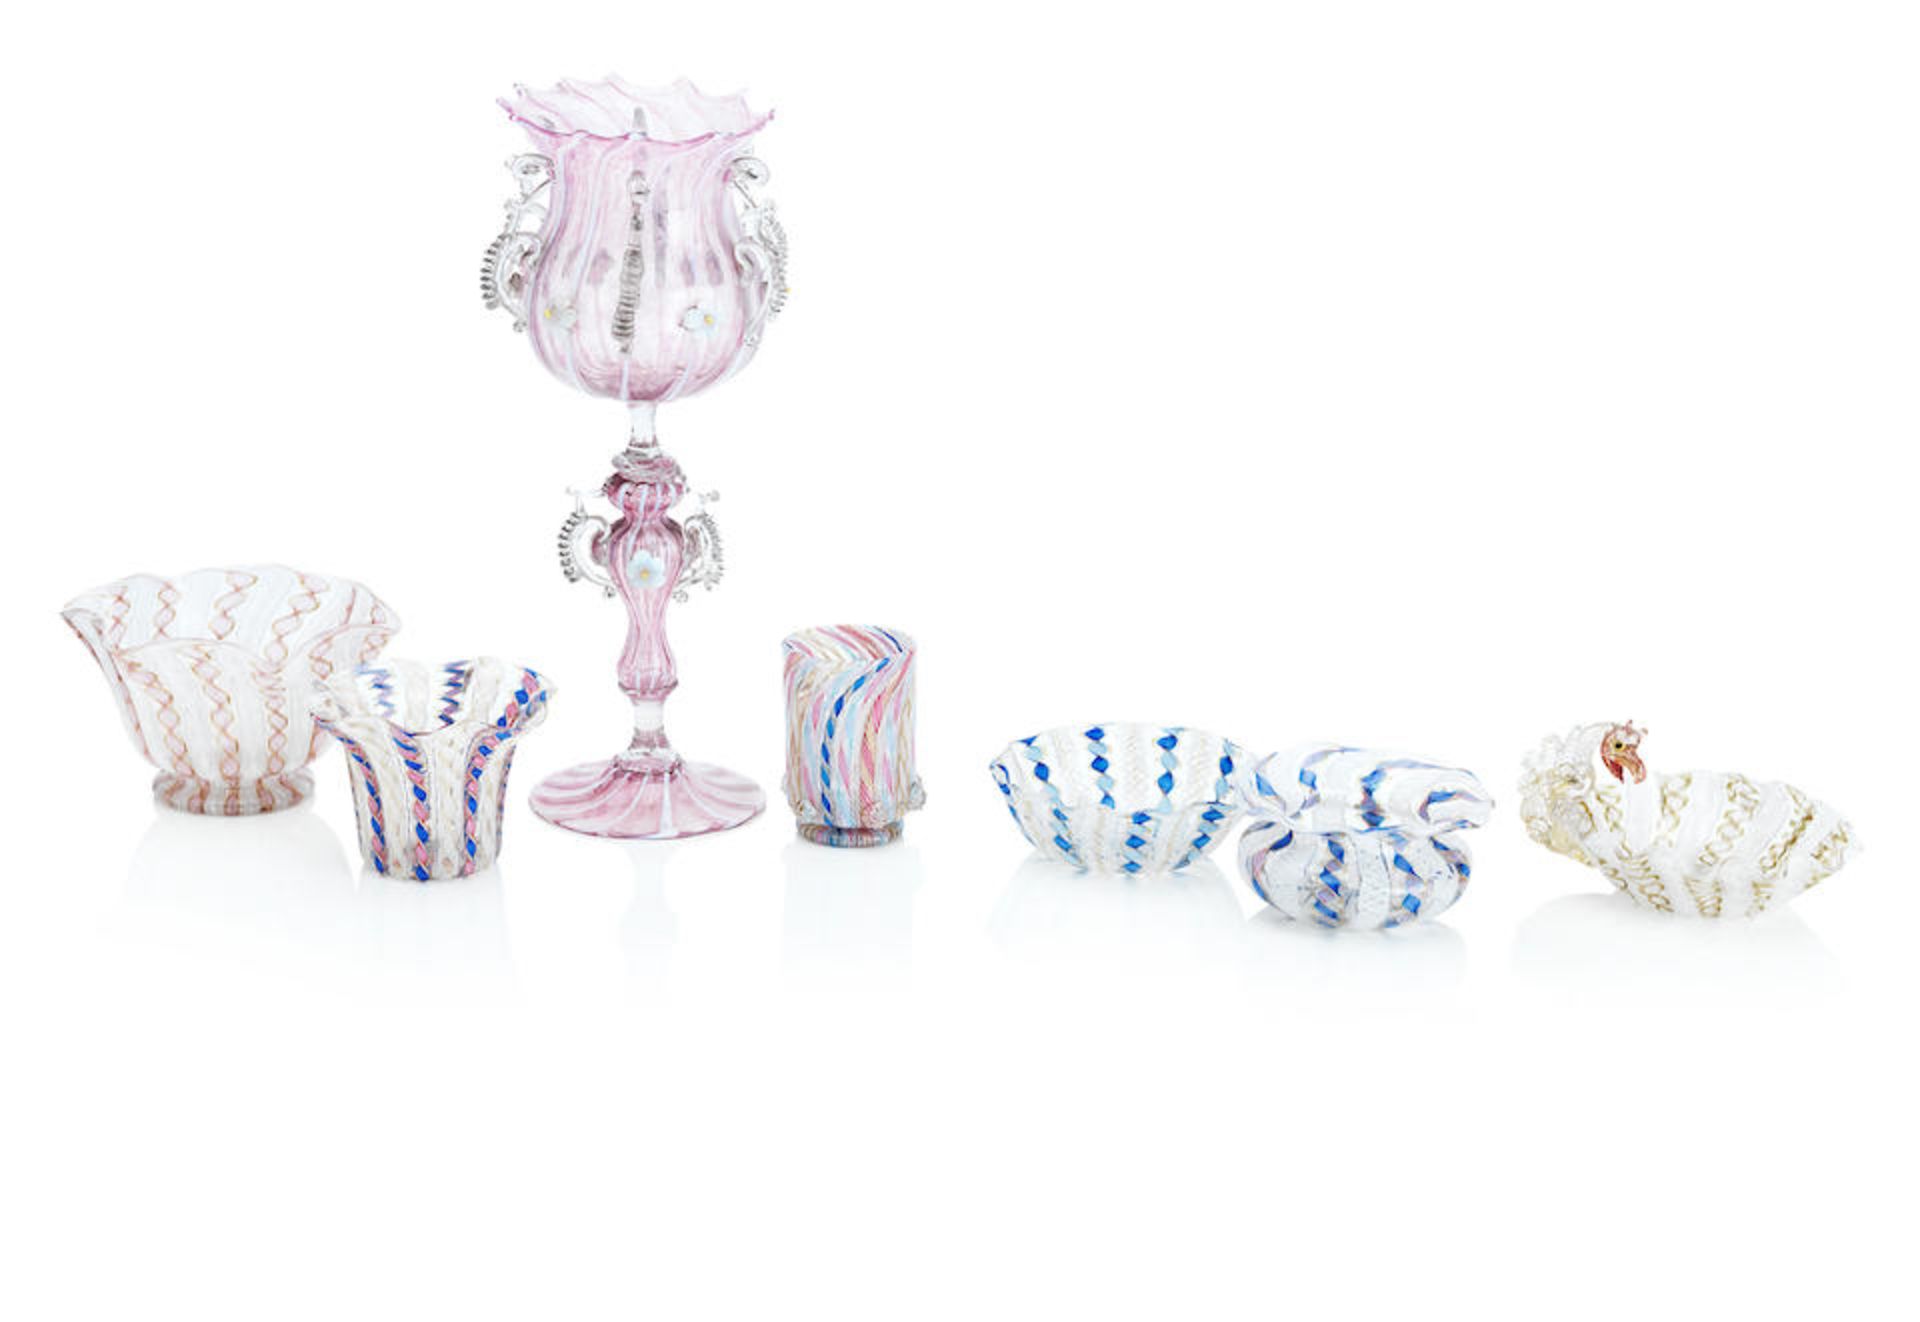 A Collection of Venetian Revival Glassware 19th Century